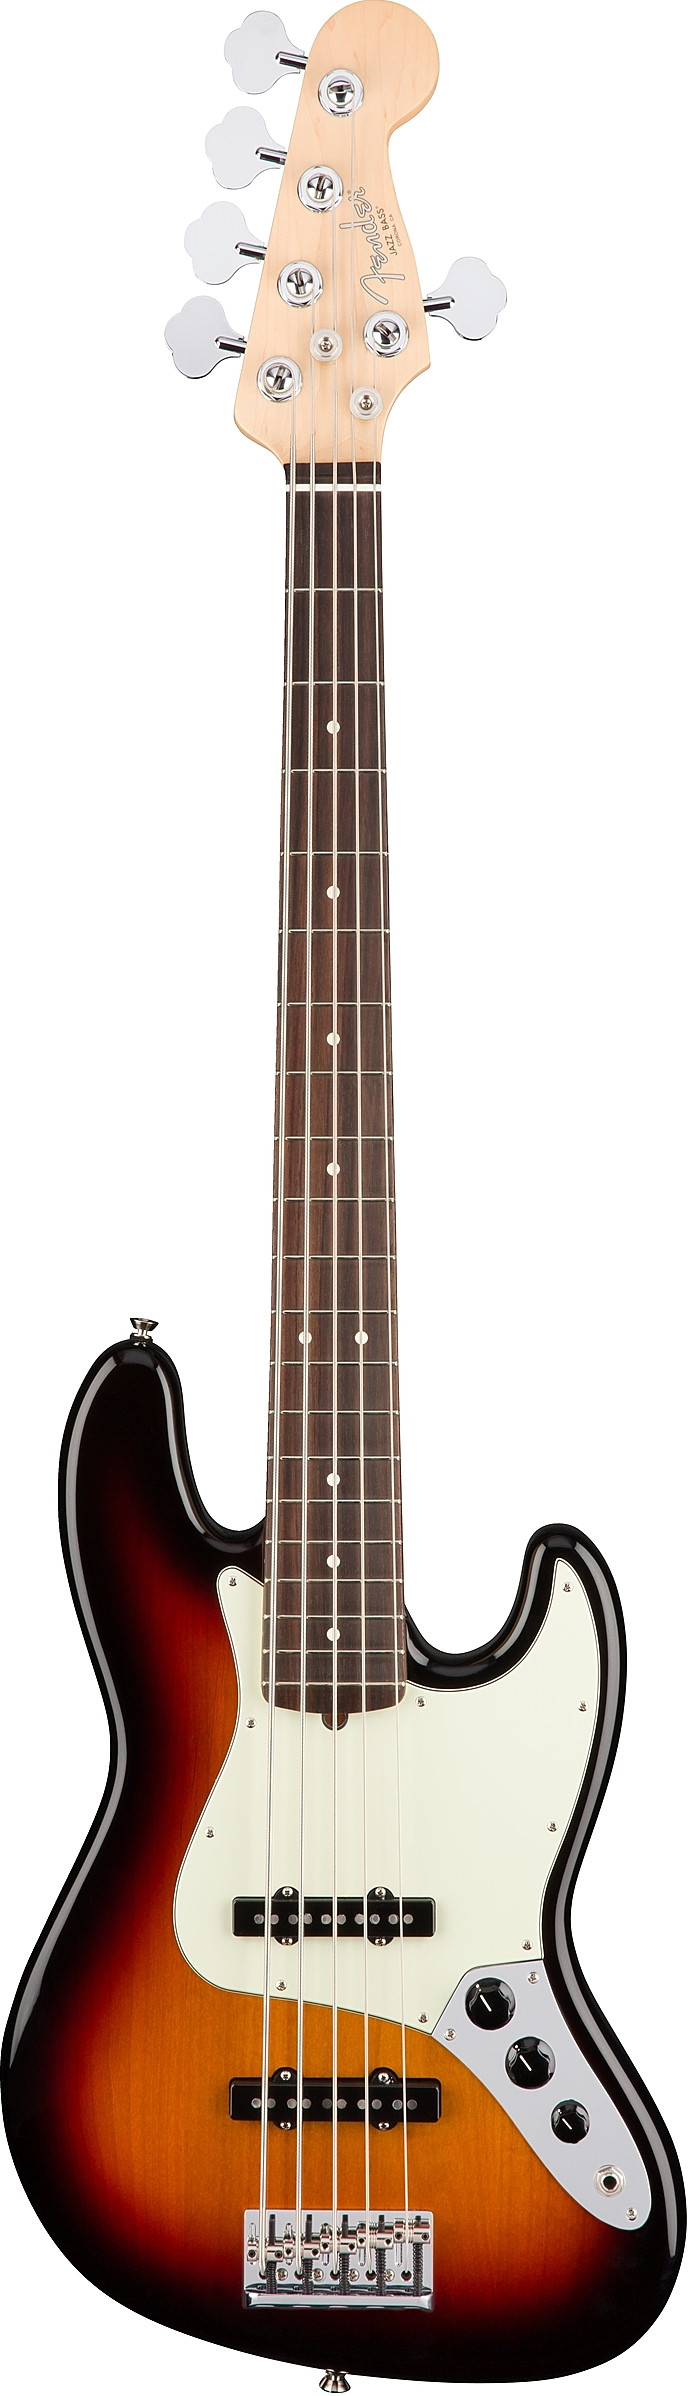 American Professional Jazz Bass V by Fender